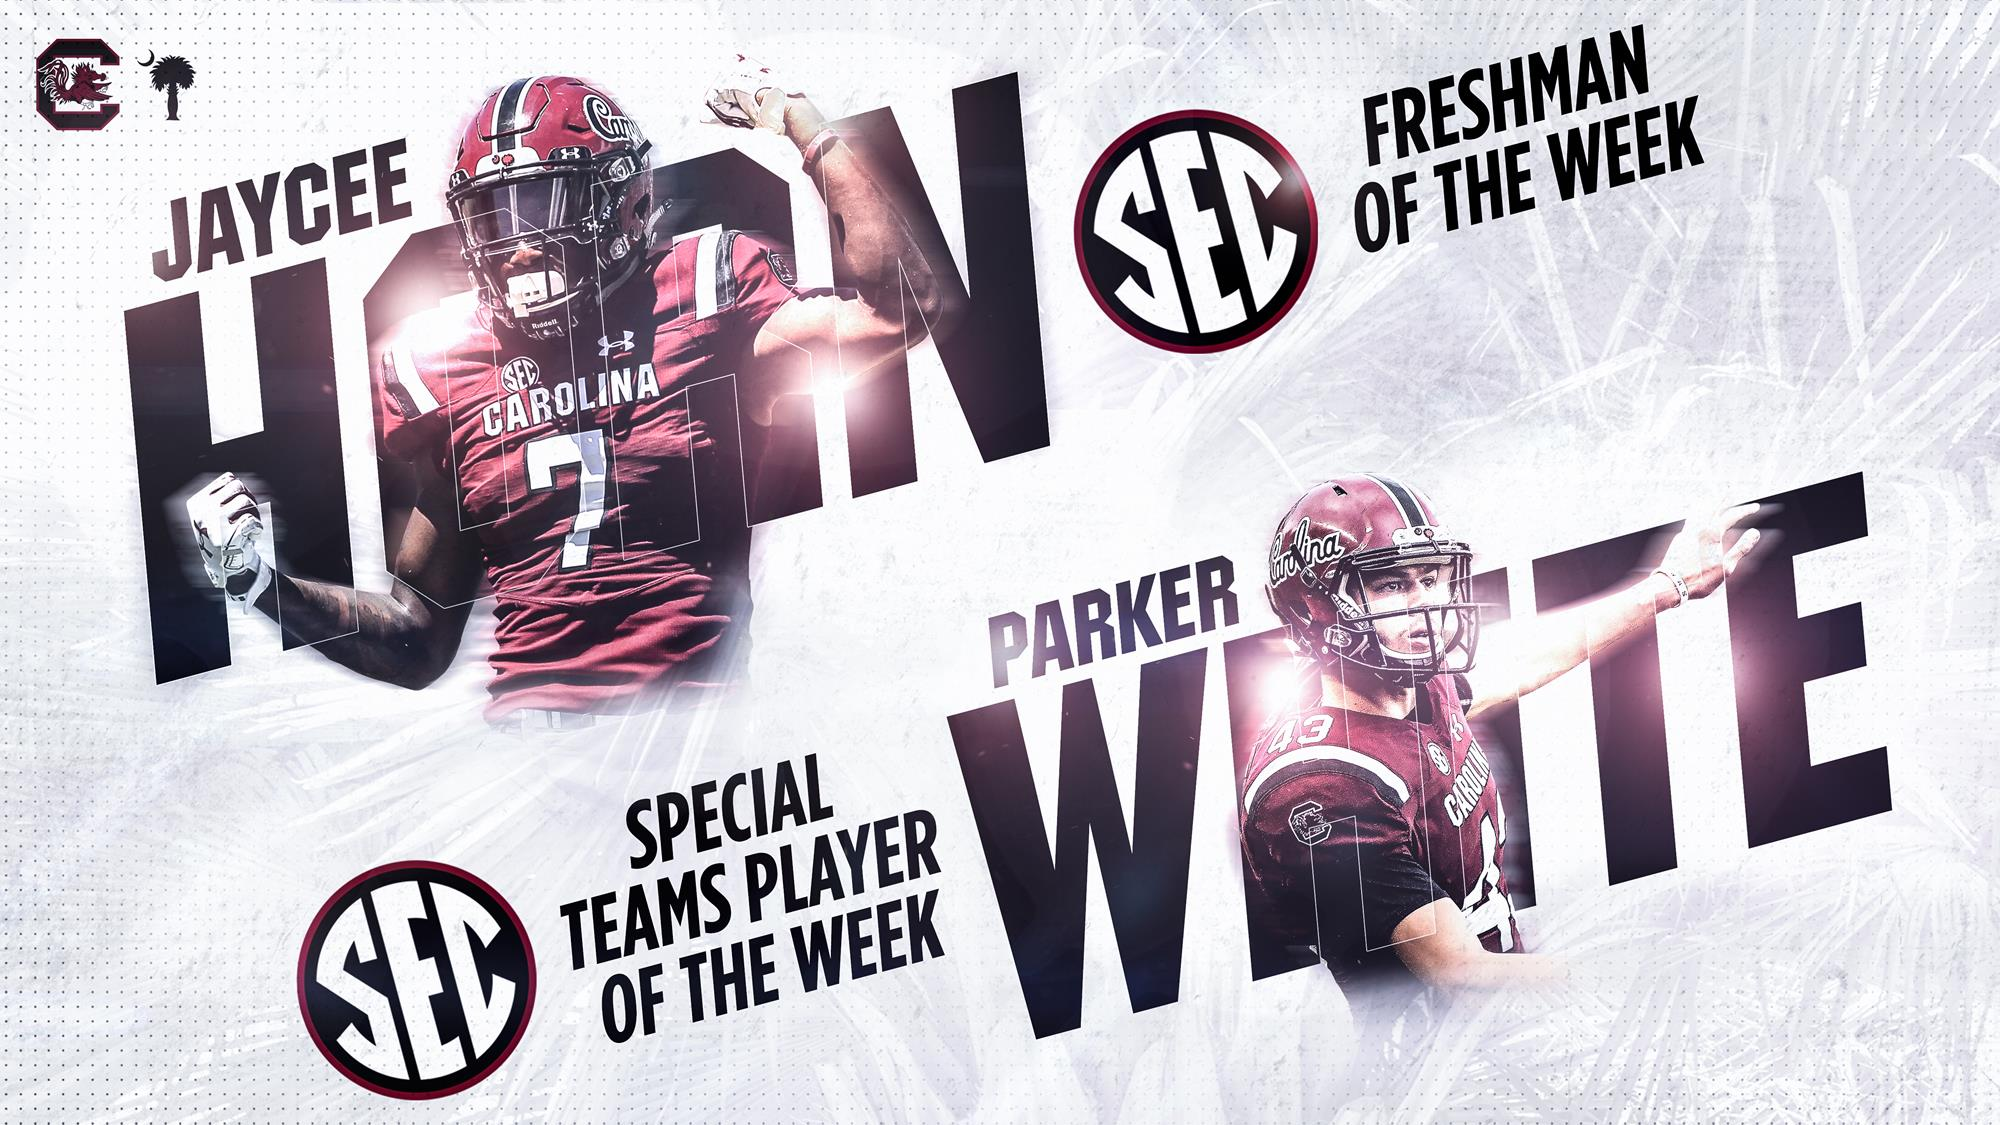 White and Horn Recognized as SEC Players of the Week